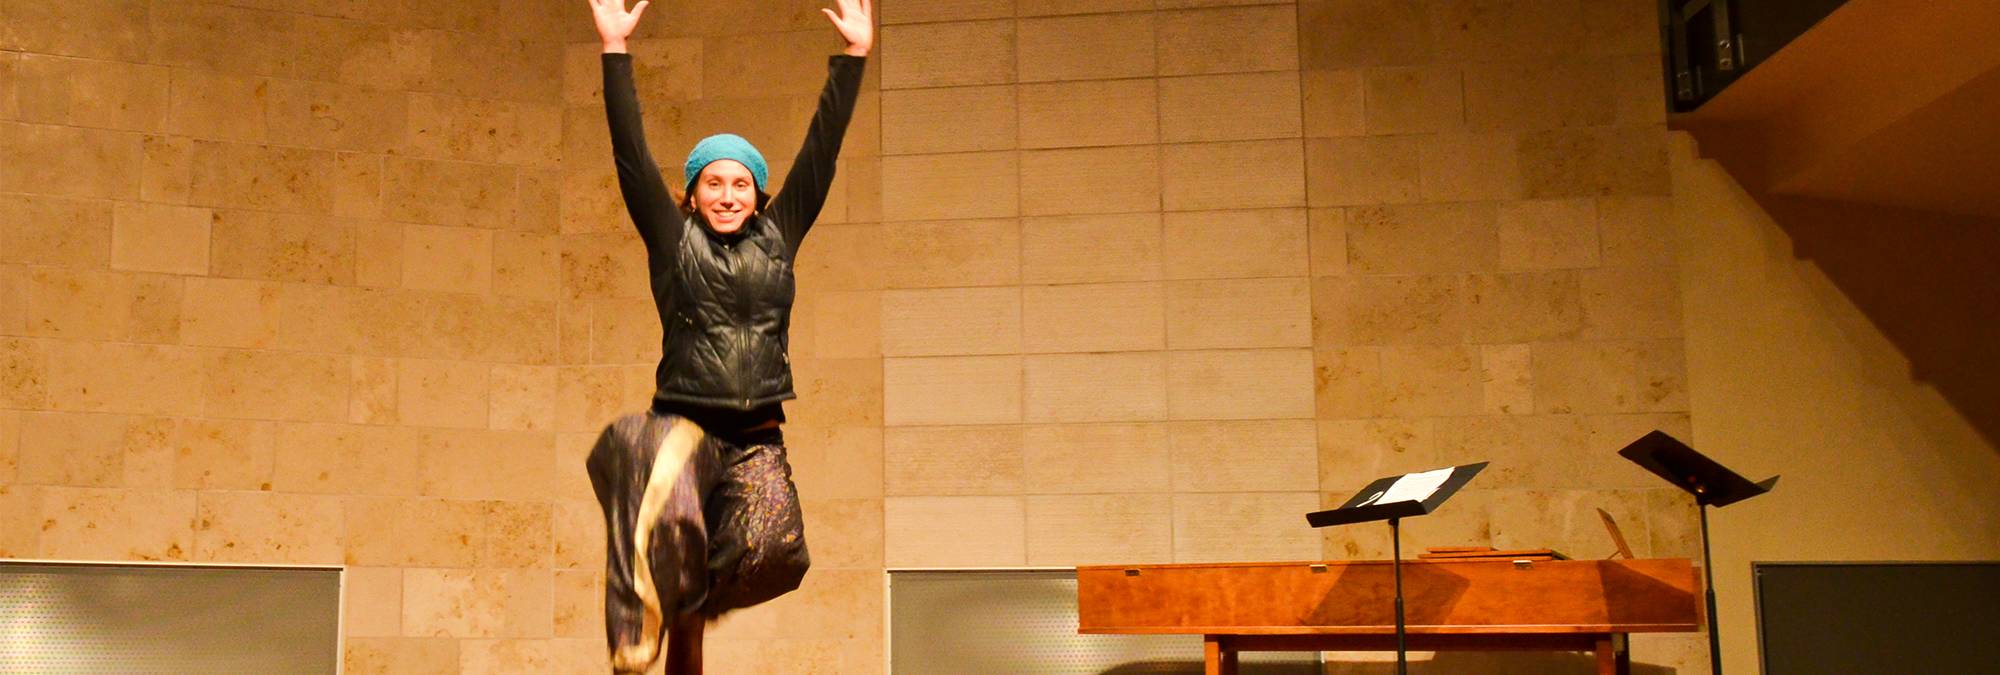 a person jumping with their hands up in the recital hall